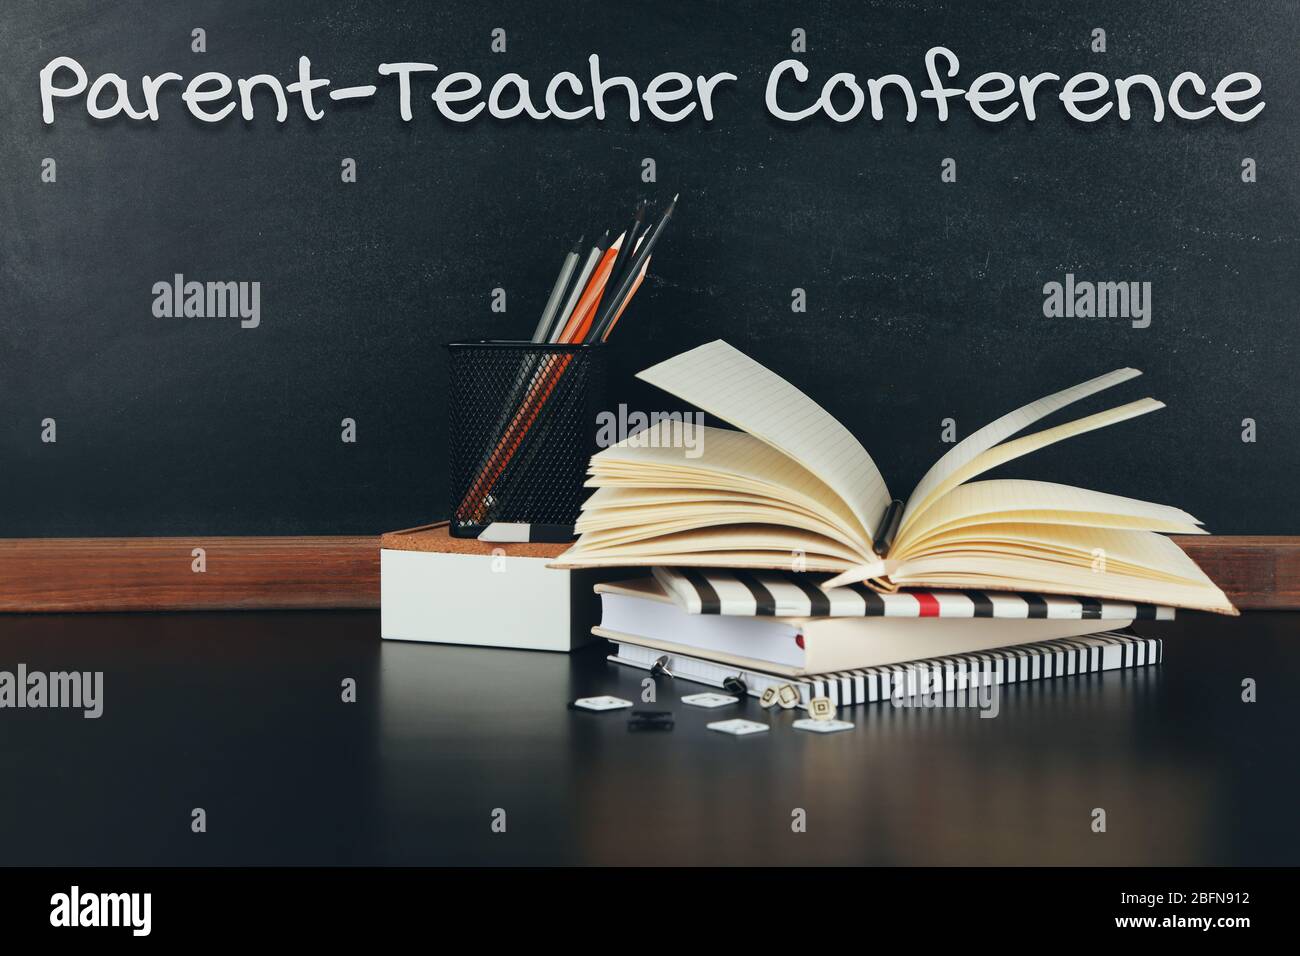 Stationary on table. Text PARENT-TEACHER CONFERENCE on blackboard background. School concept. Stock Photo